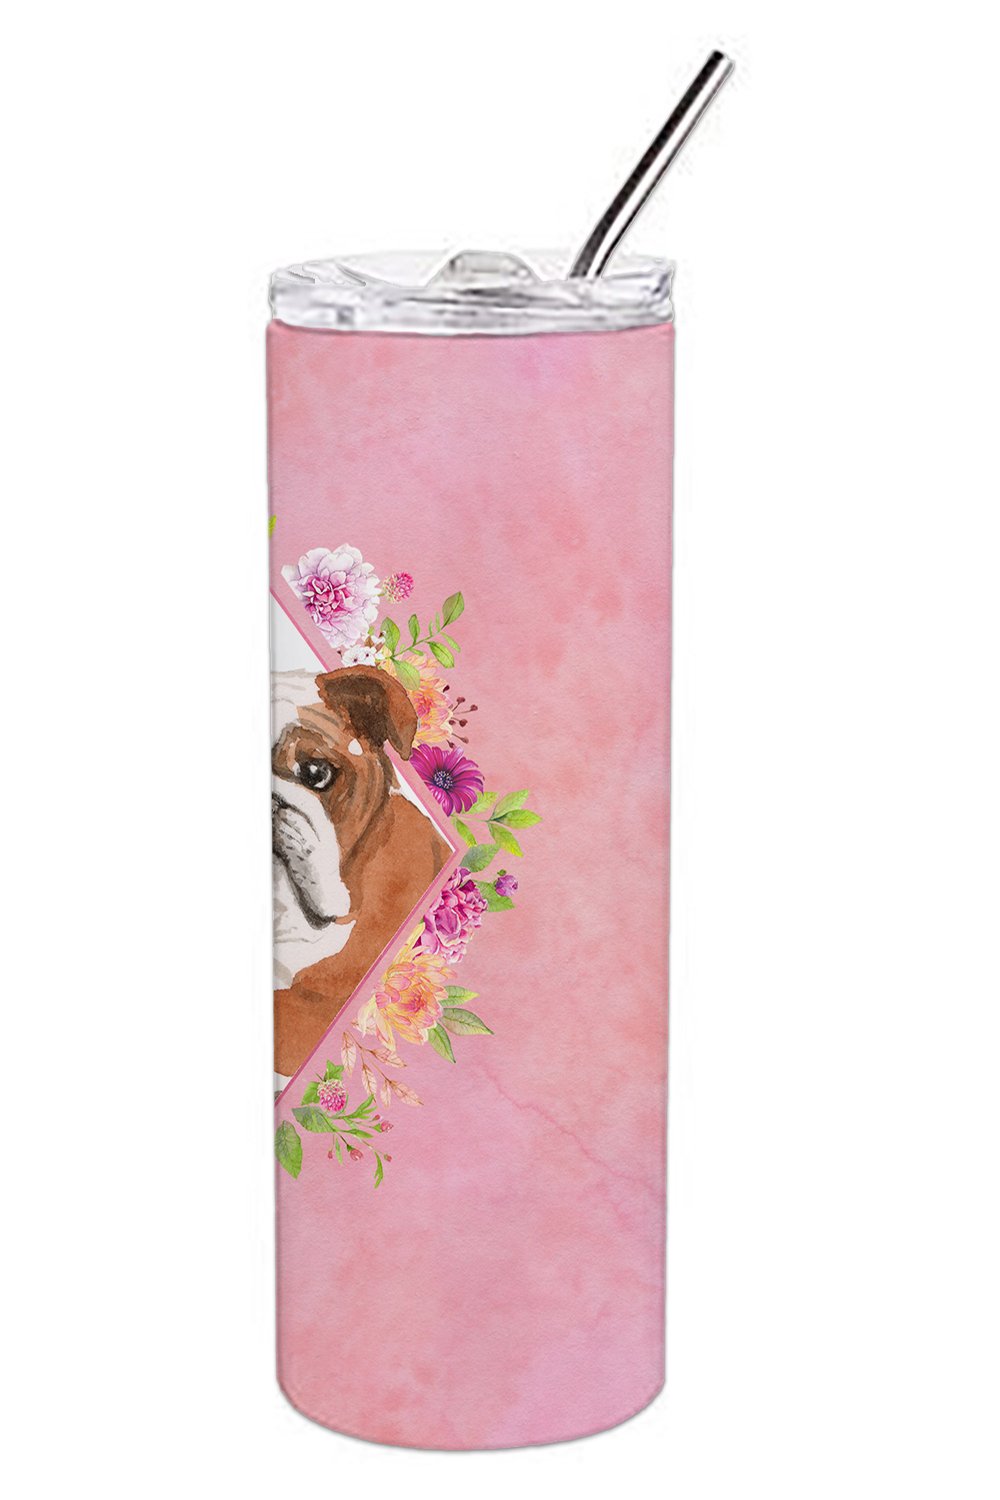 English Bulldog Pink Flowers Double Walled Stainless Steel 20 oz Skinny Tumbler CK4240TBL20 by Caroline's Treasures